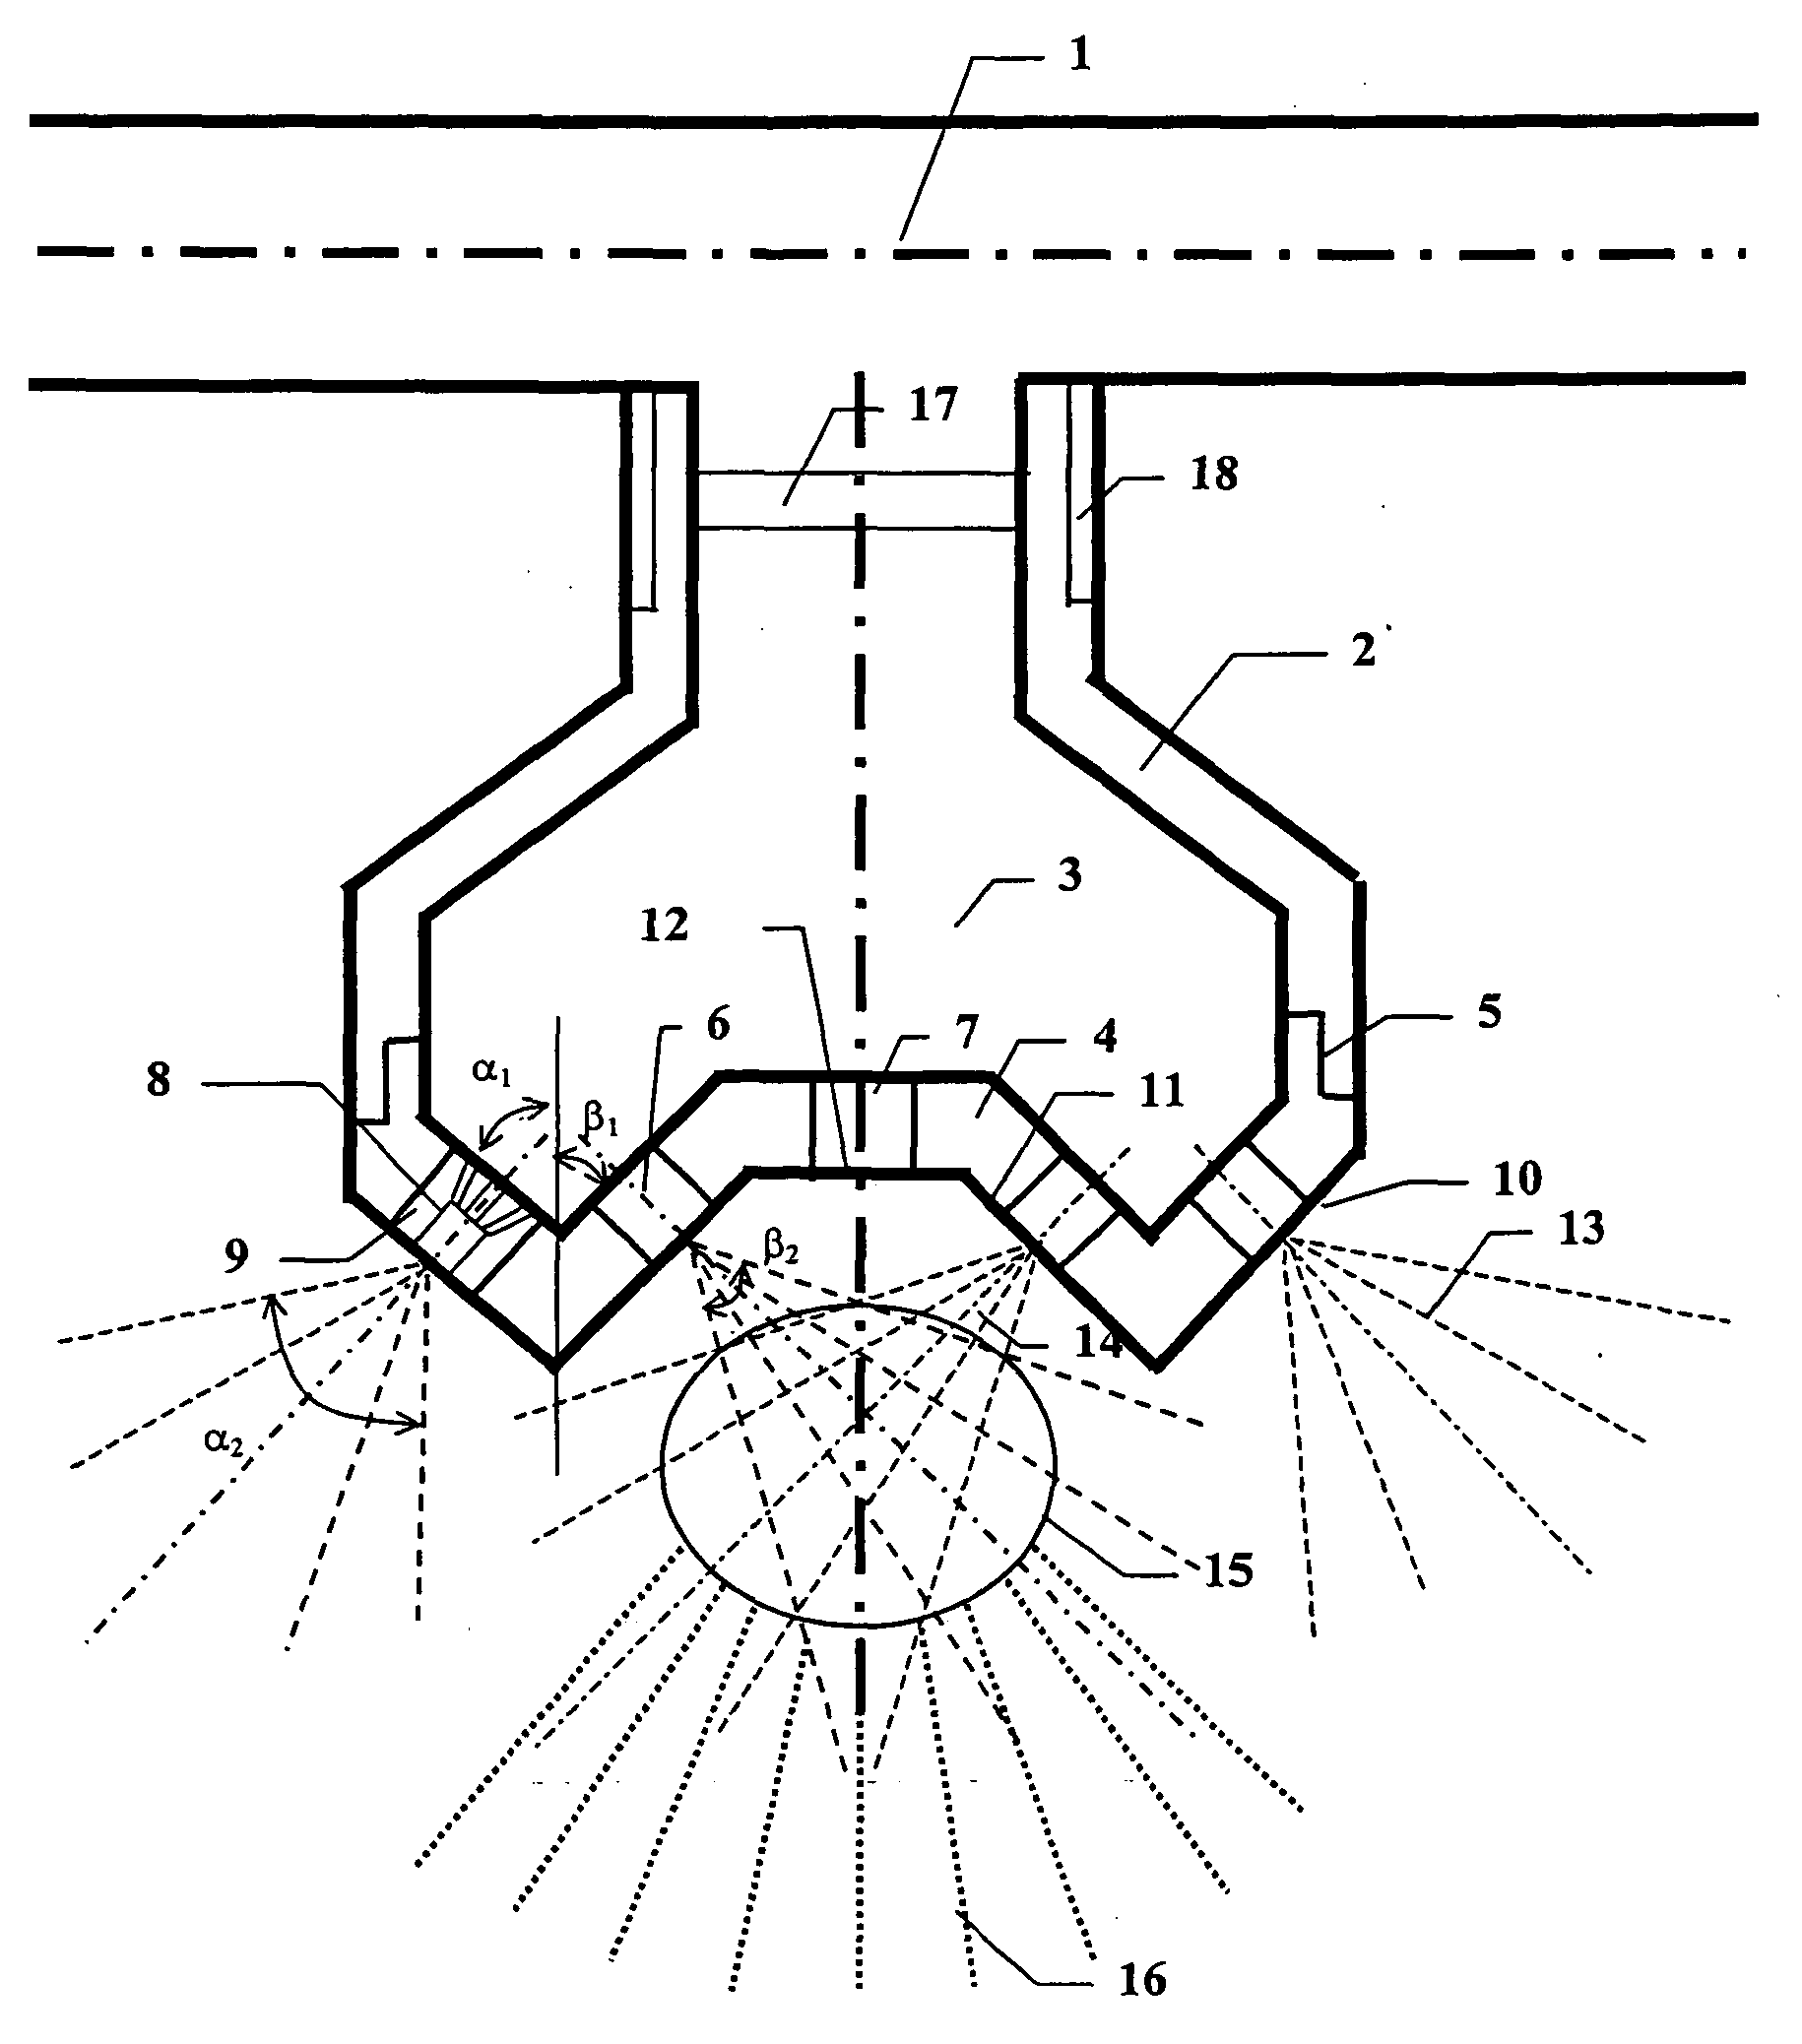 Spray head and nozzle arrangement for fire suppression